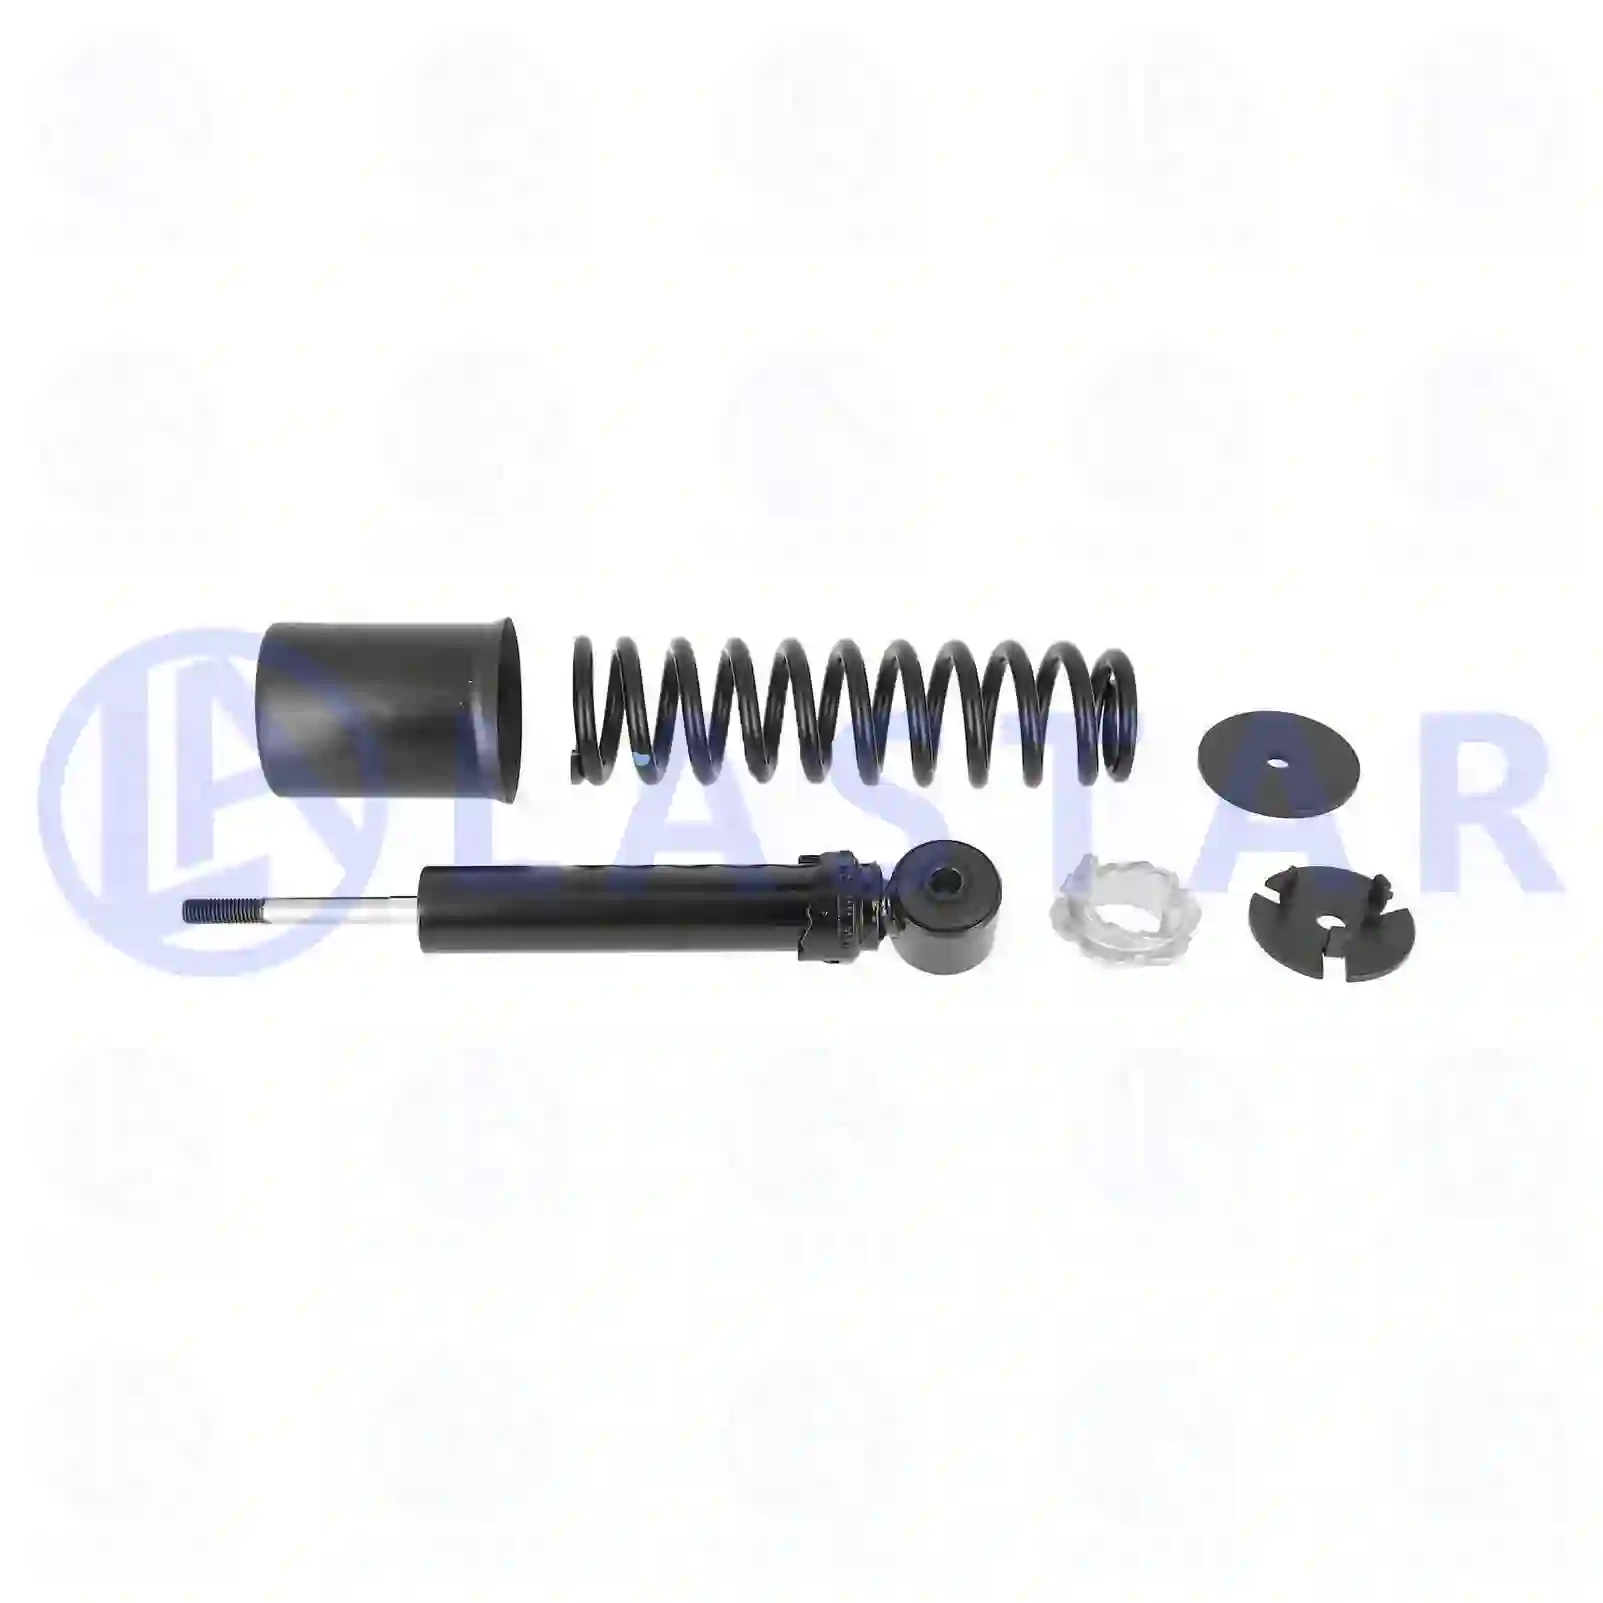 Cabin shock absorber, complete, 77736094, 1761372S, ZG41200-0008, , , , ||  77736094 Lastar Spare Part | Truck Spare Parts, Auotomotive Spare Parts Cabin shock absorber, complete, 77736094, 1761372S, ZG41200-0008, , , , ||  77736094 Lastar Spare Part | Truck Spare Parts, Auotomotive Spare Parts